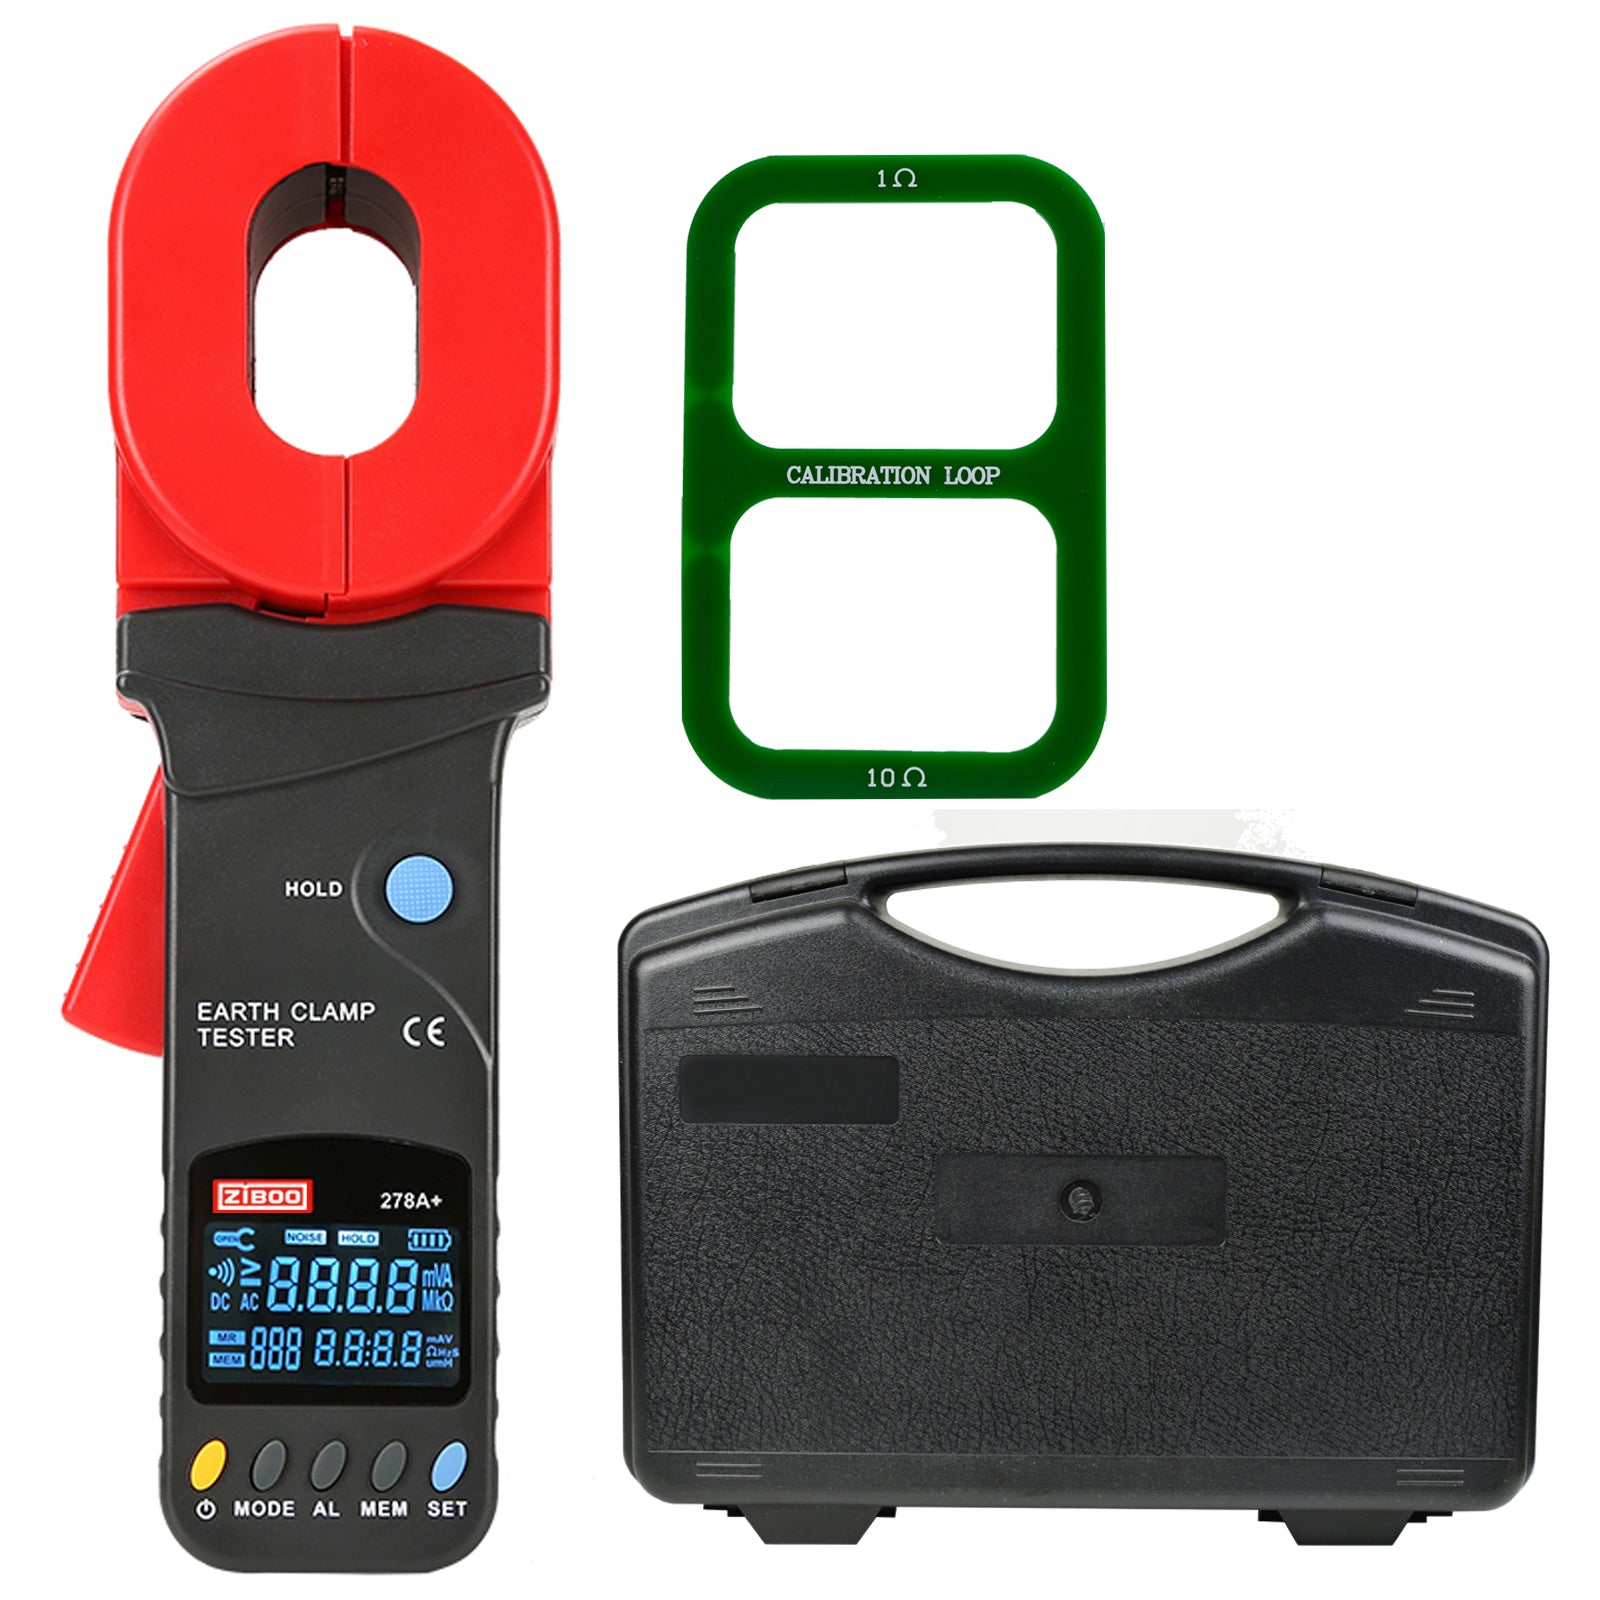 ZIBOO ZB-278A+ Clamp Earth Tester Resistance Data Storage Visual/Audible Alarm